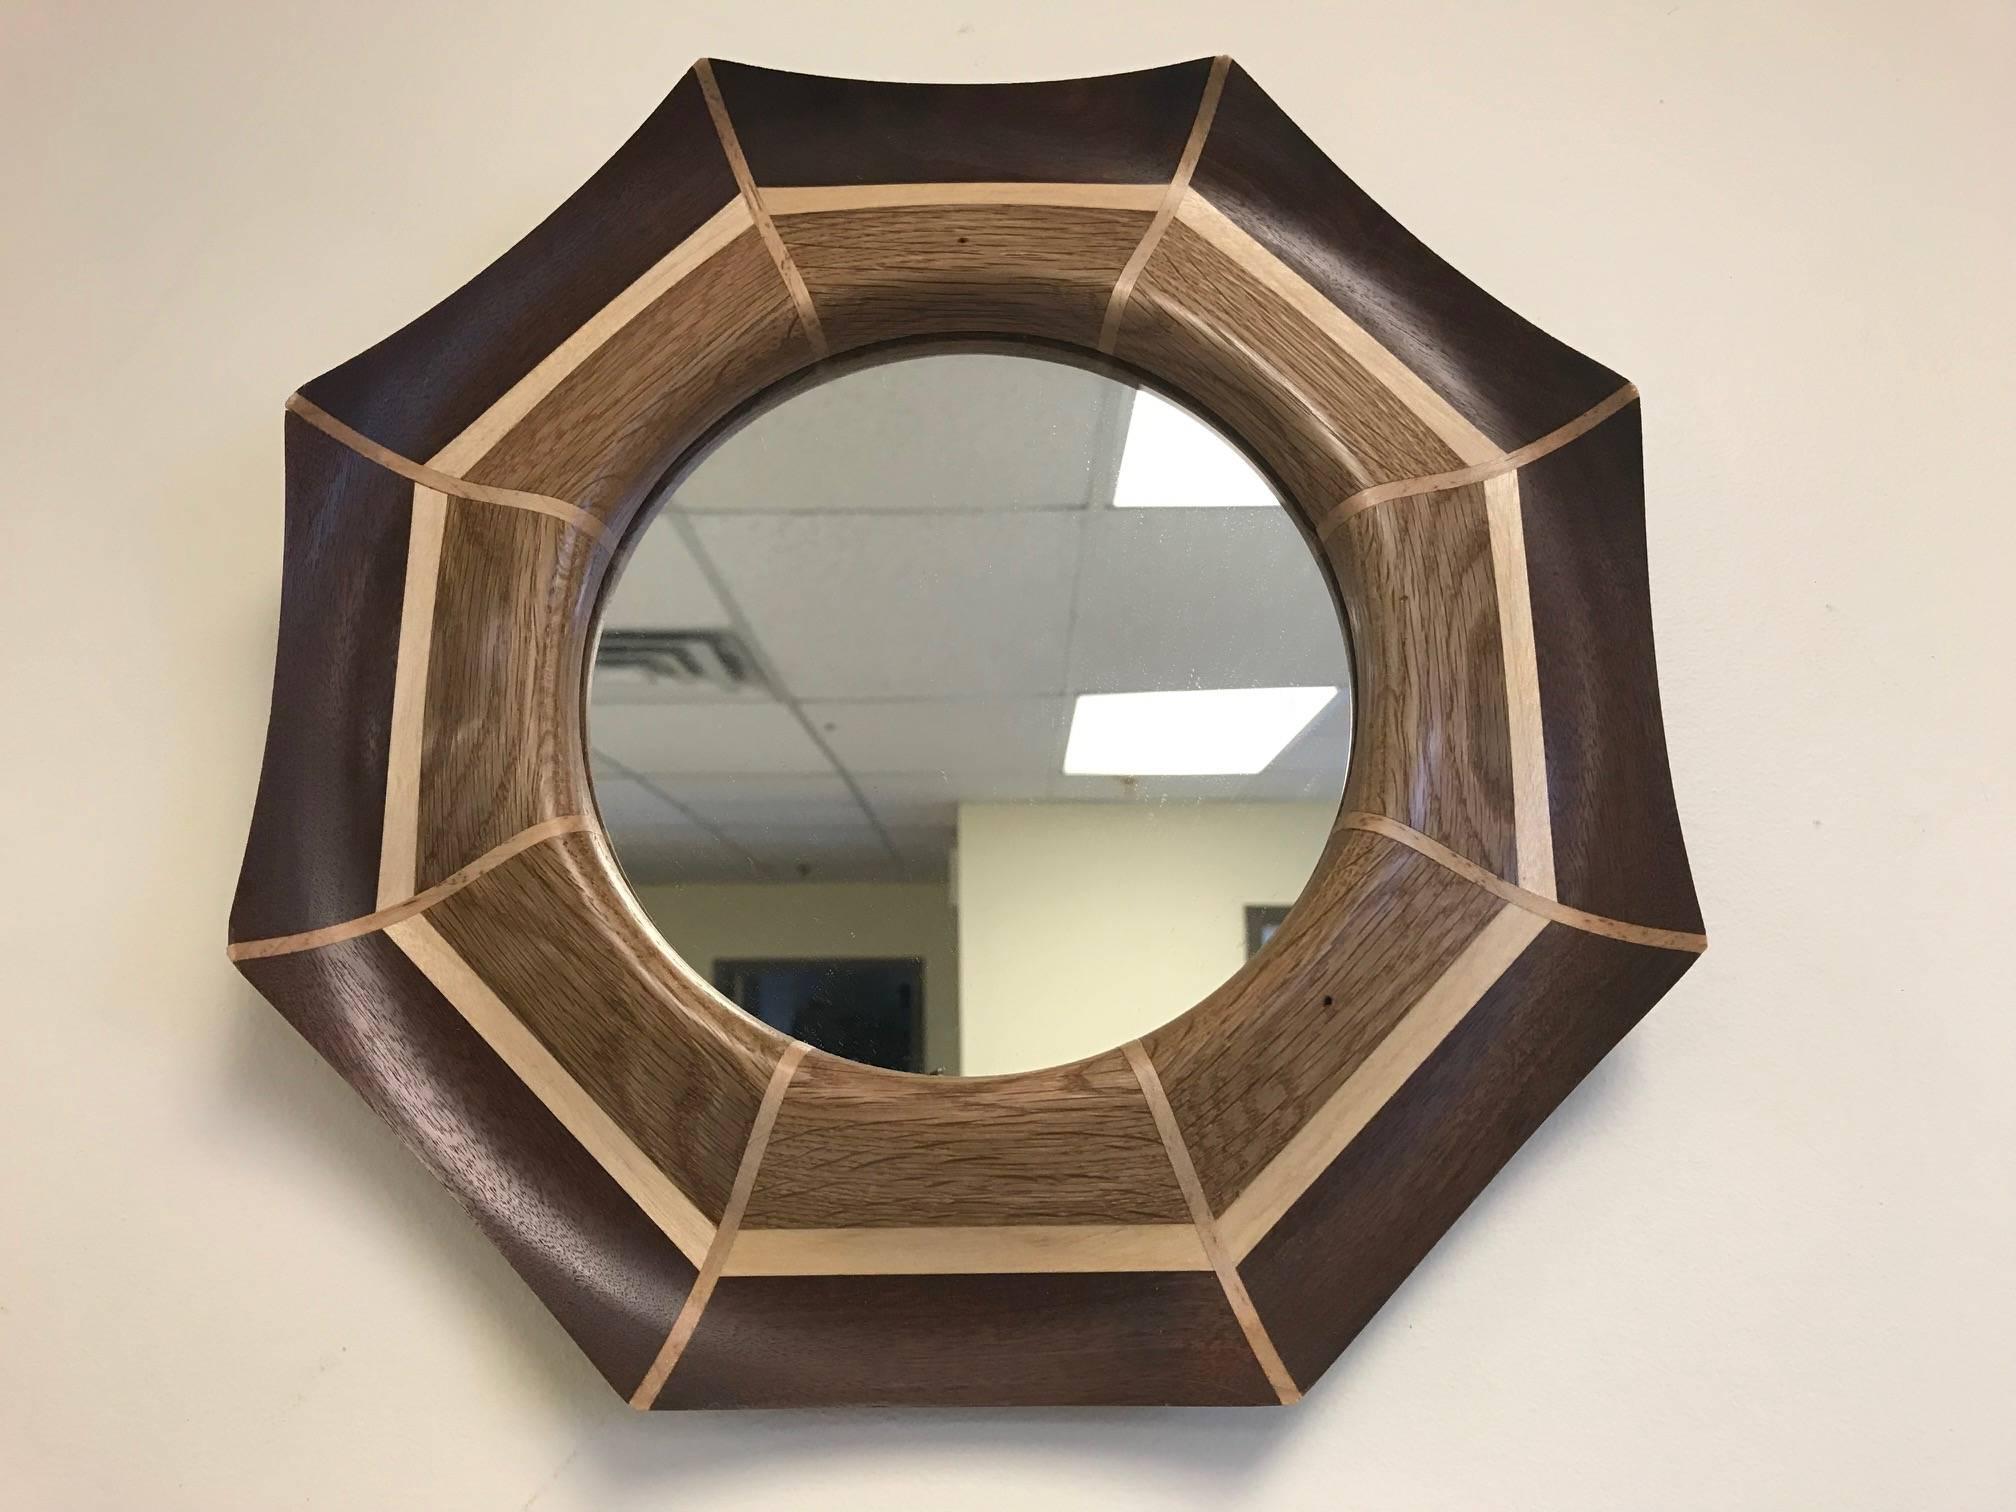 Custom oak and walnut with maple inlay mirror.
The mirror listed is currently available.